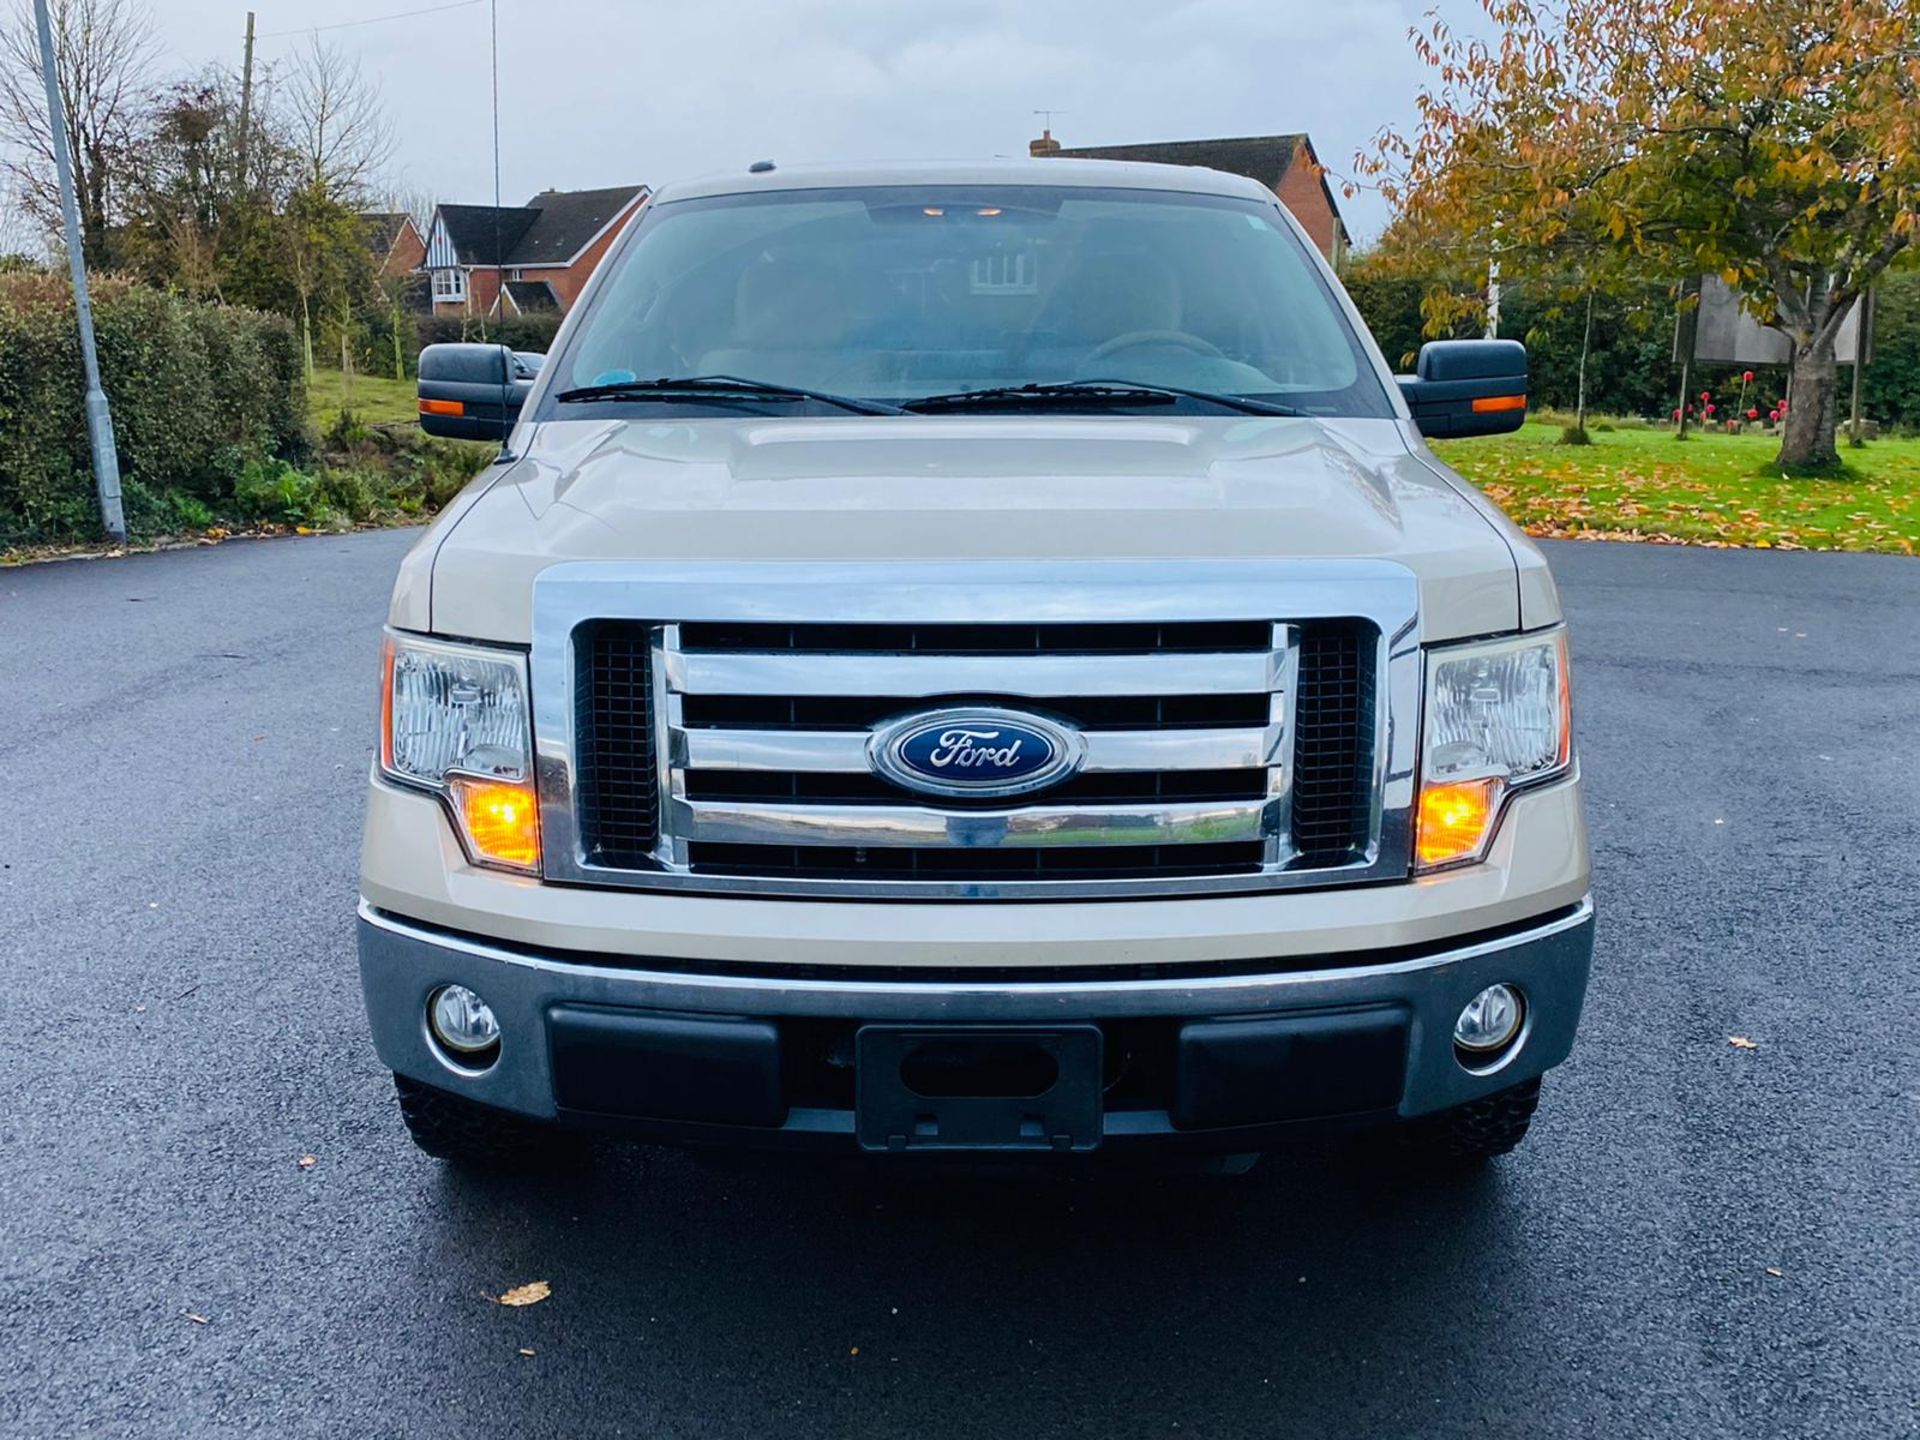 (RESERVE MET) Ford F-150 XLT 4.6L V8 Supercab - 2010 Year - 6 Seats - Fresh Imports - Image 6 of 39